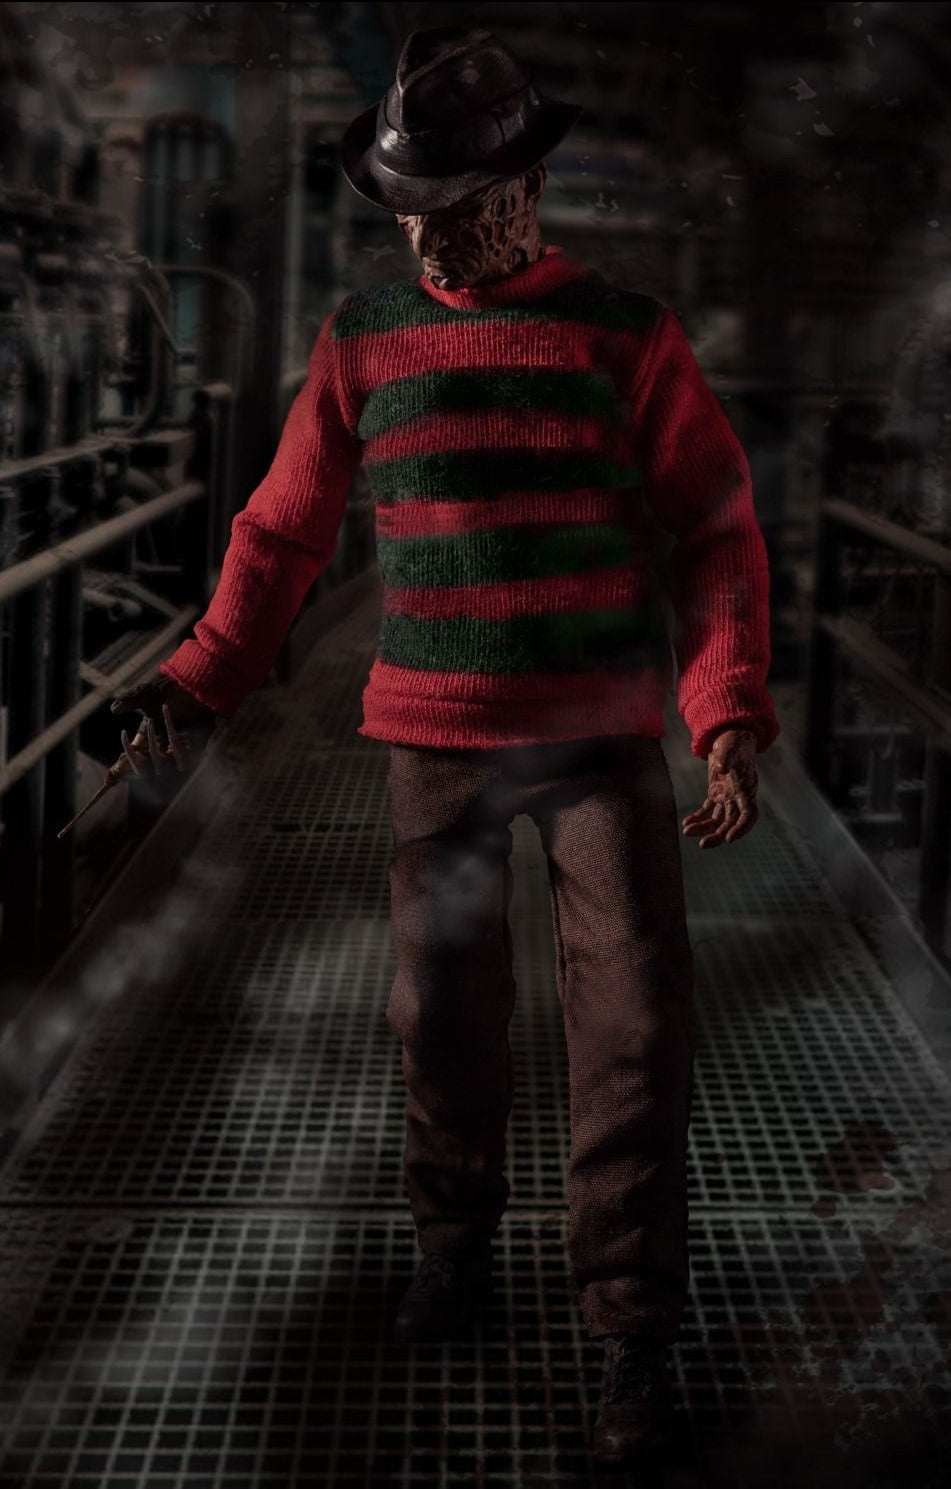 Mezco Toys One:12 Collective: A Nightmare on Elm Street: Freddy Krueger Action Figure 2